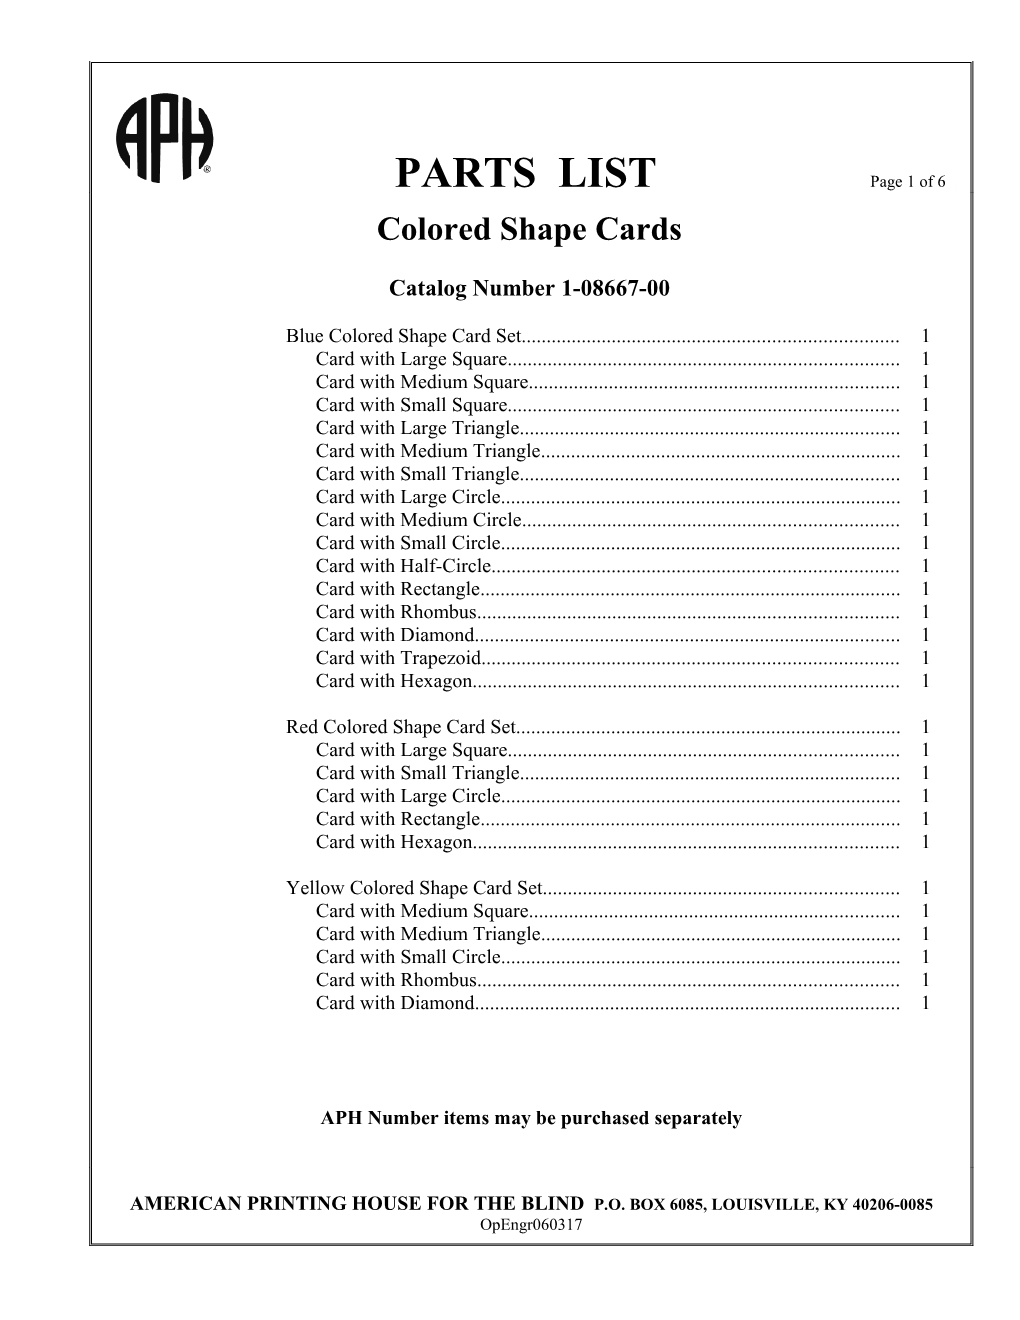 PARTS LIST Page 1 of 6